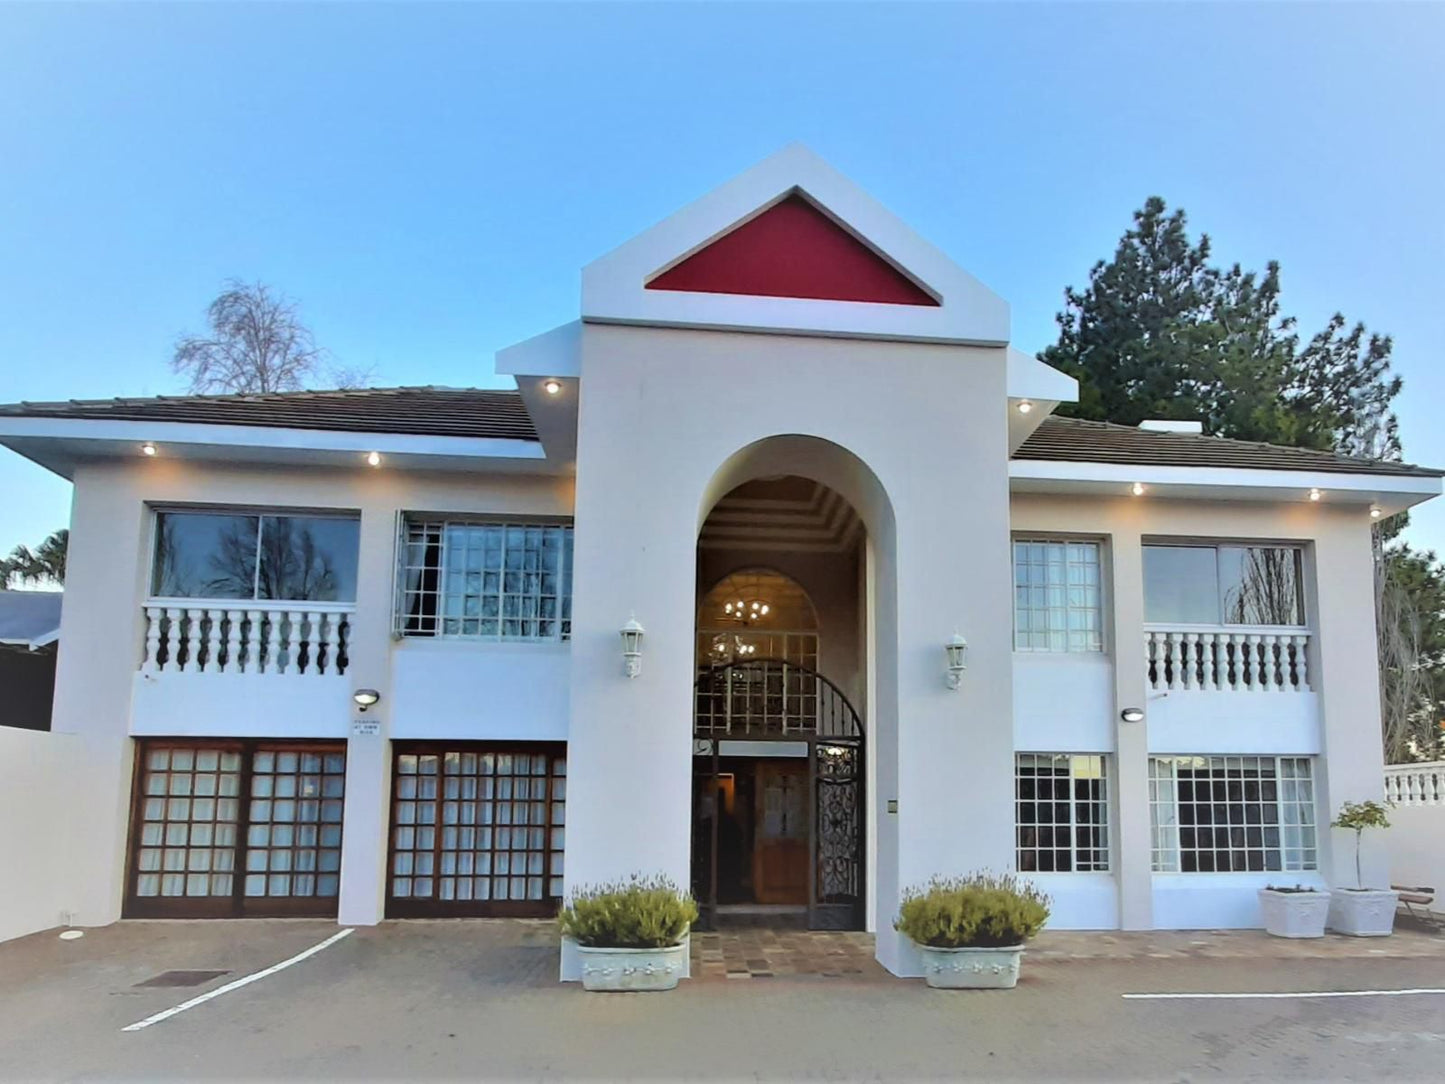 Florentia Guest House Waverley Bloemfontein Free State South Africa House, Building, Architecture